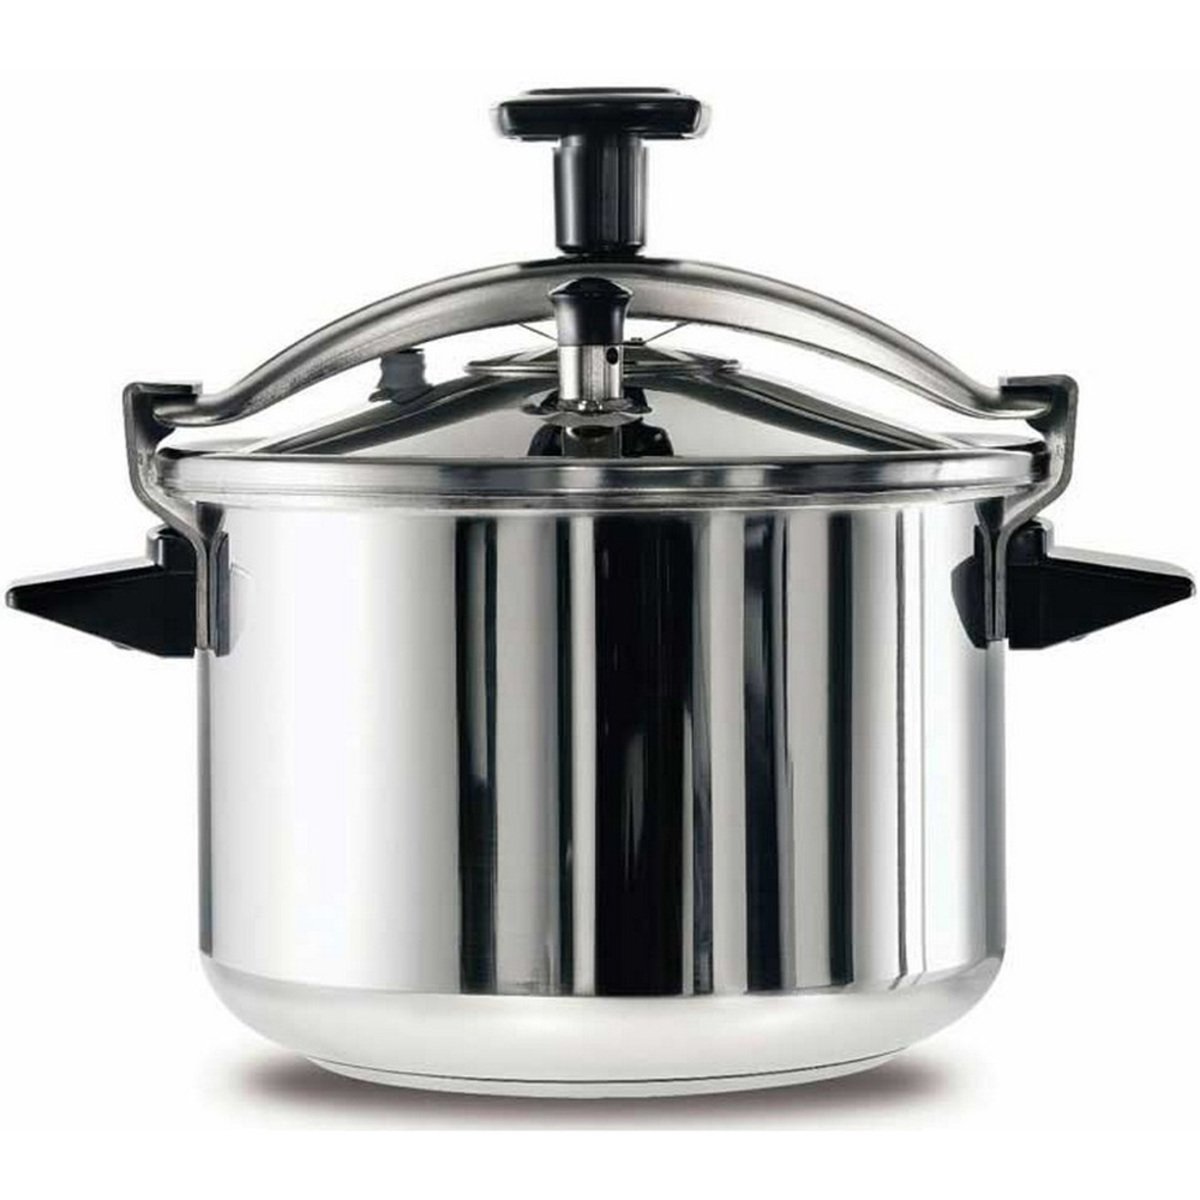 Joint cocotte tefal clipso - Cdiscount